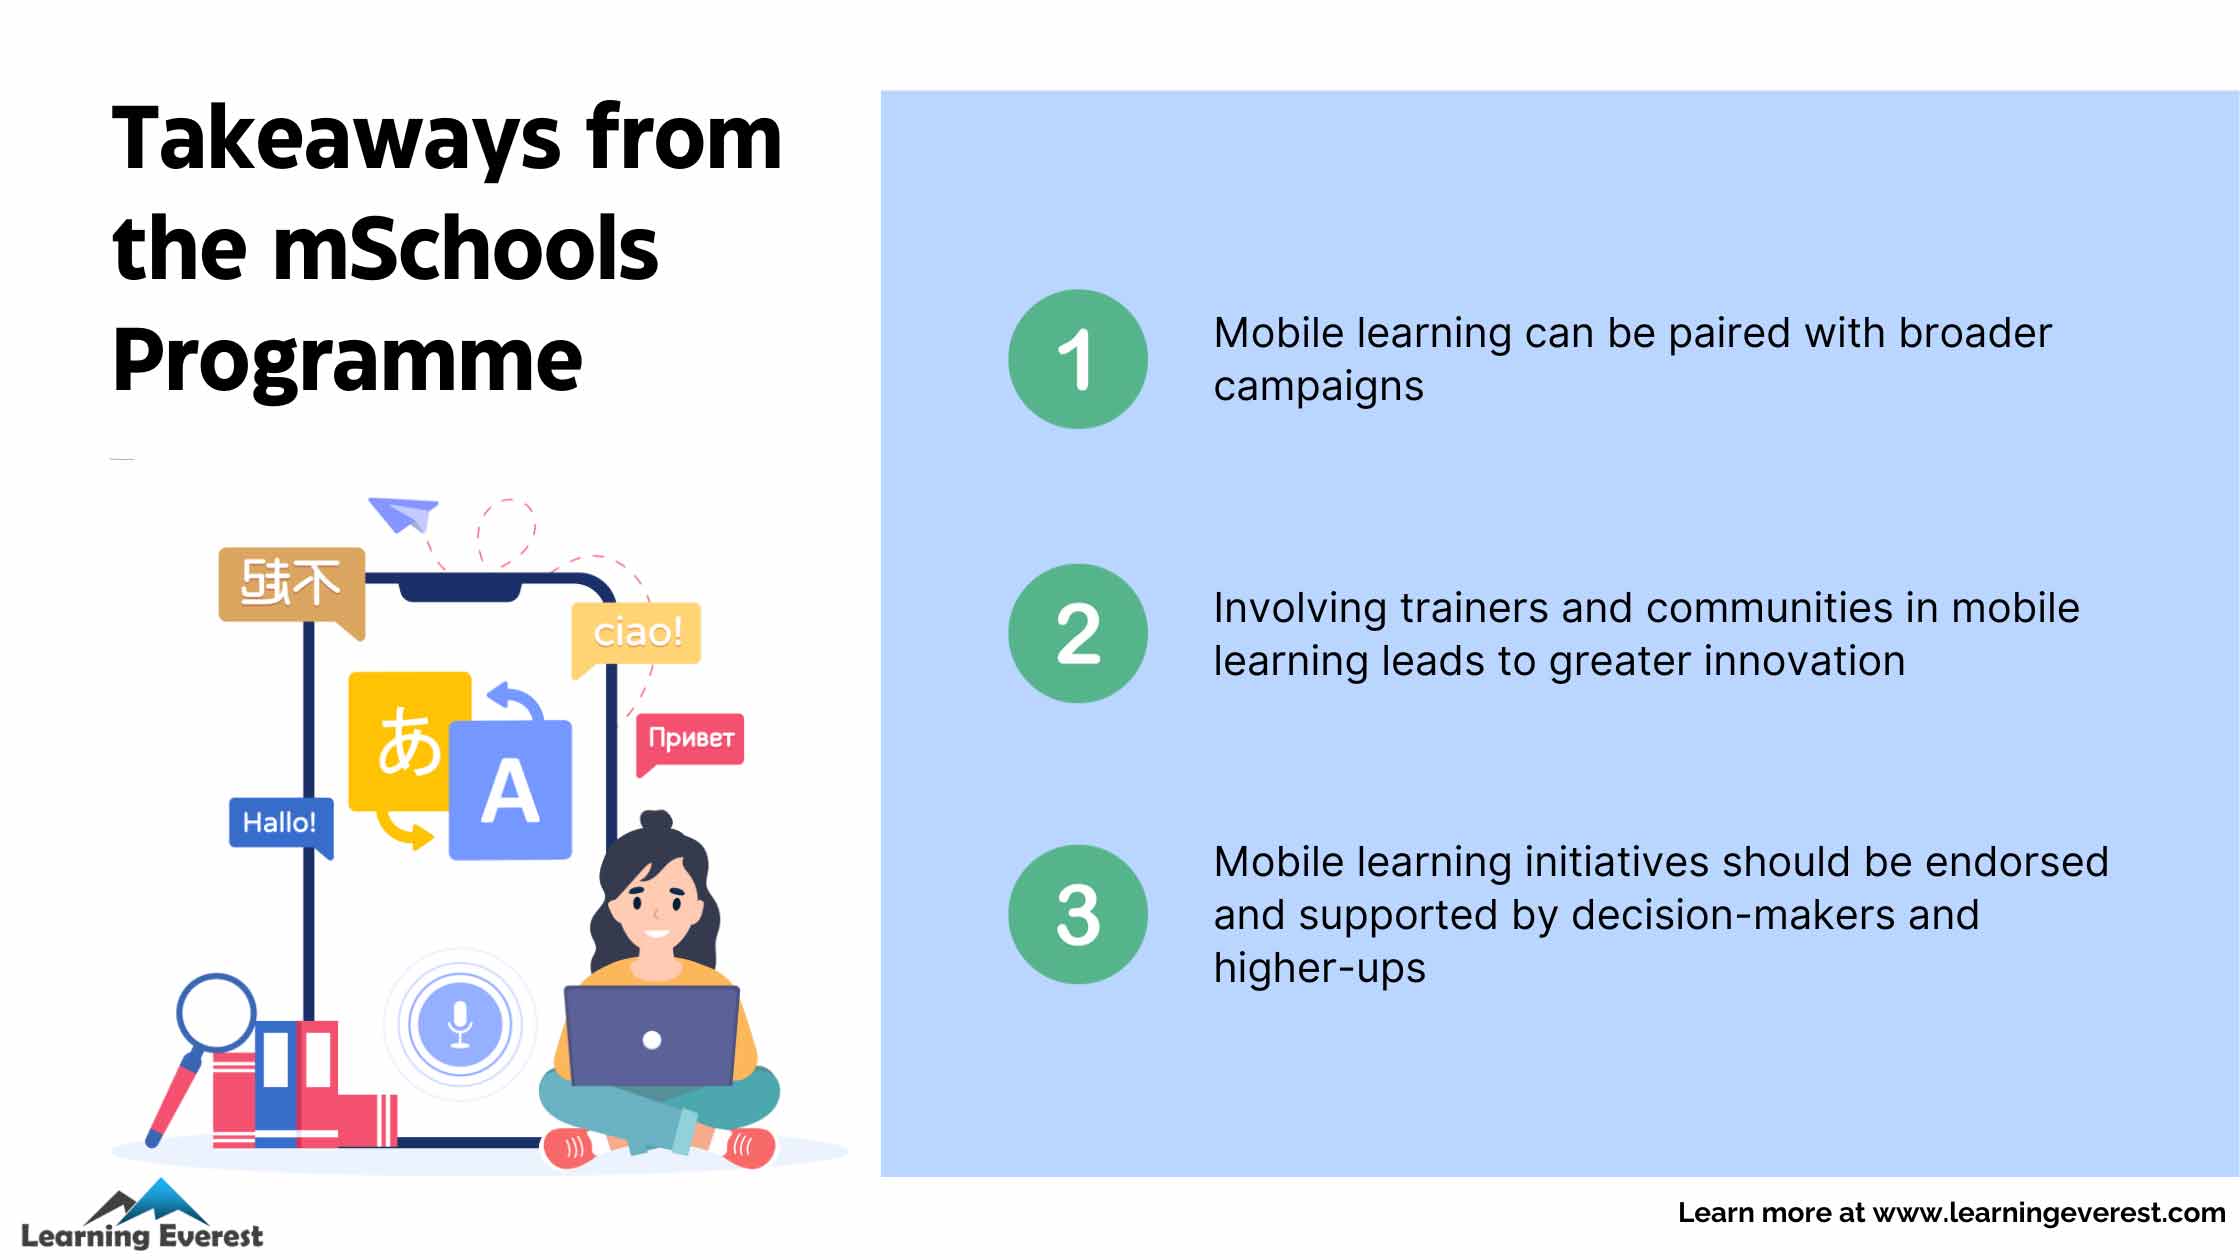 Mobile Learning for Innovation - Takeaways from the mSchools Programme